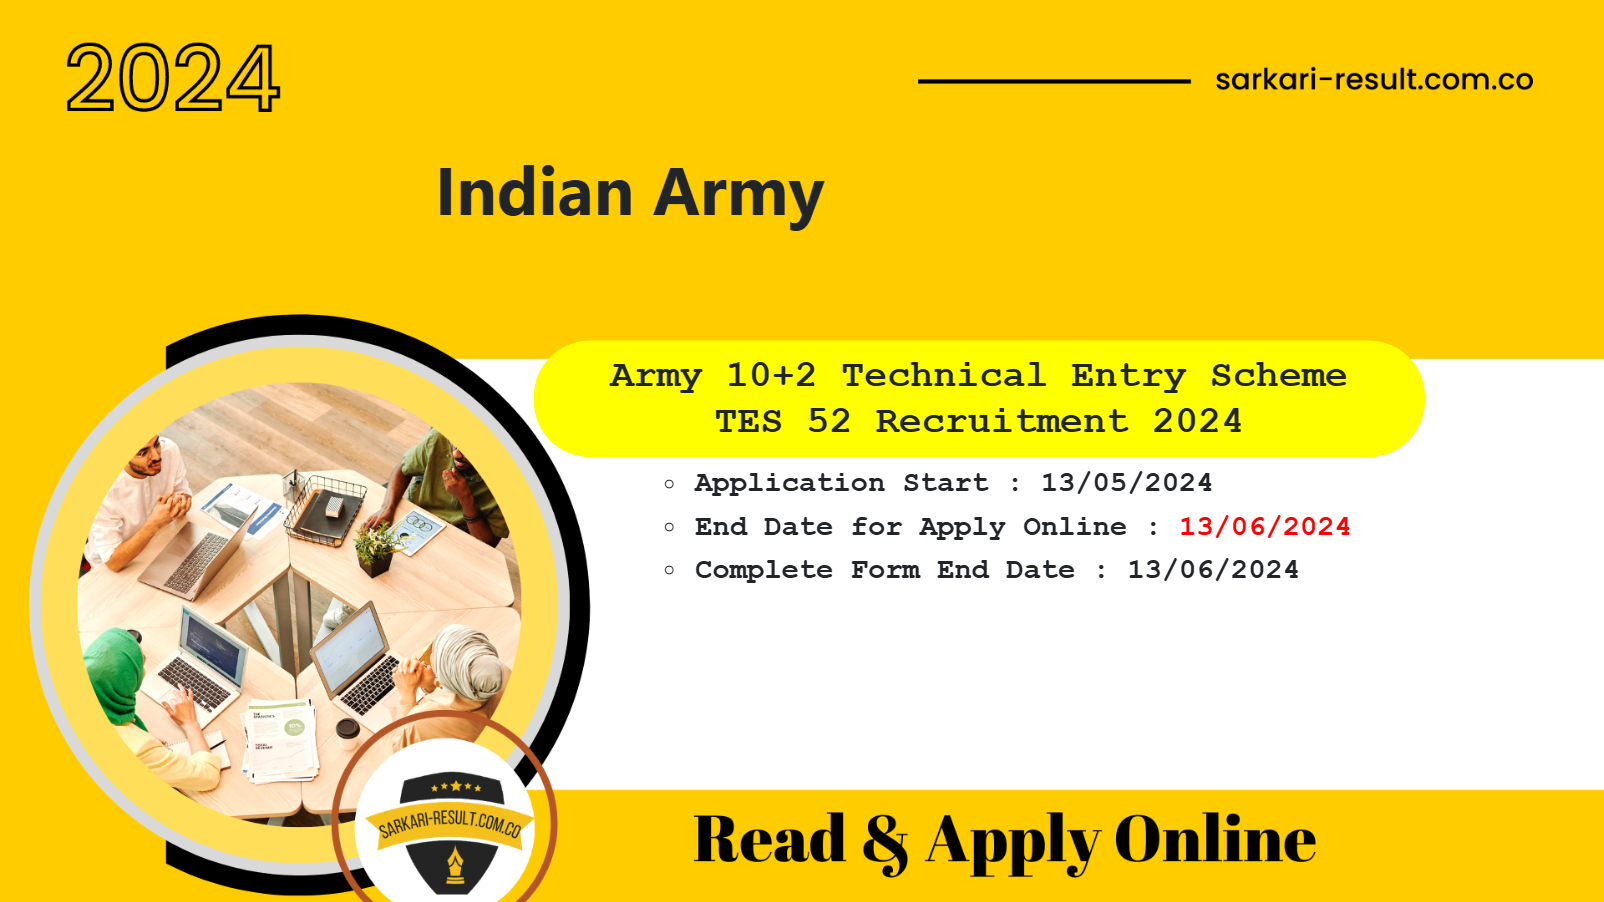 Army 10+2 TES 52 Online Form 2024 for 90 Post Jan 2025 Batch